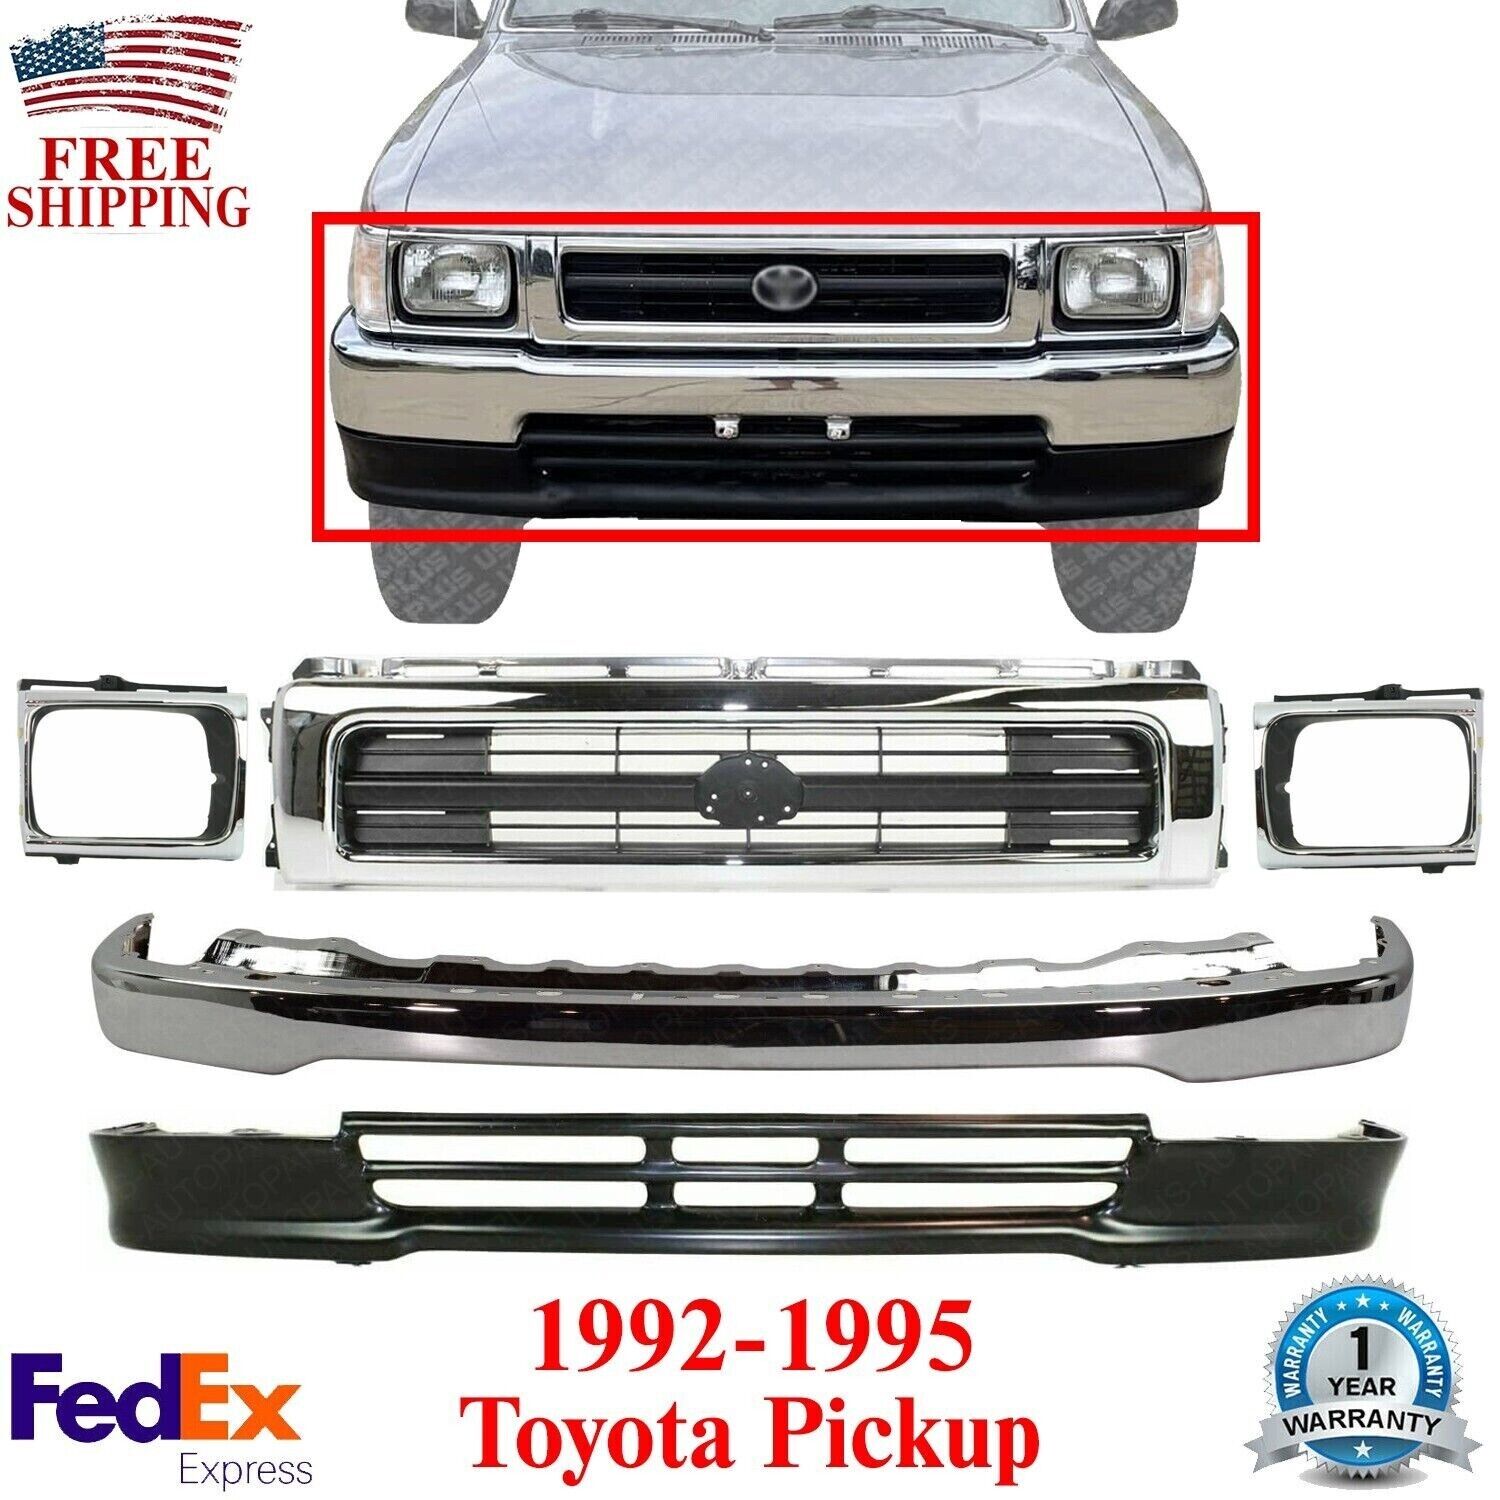 Front Bumper + Grille + Valance + Headlight Bezels For 1992-95 Toyota Pickup 4WD